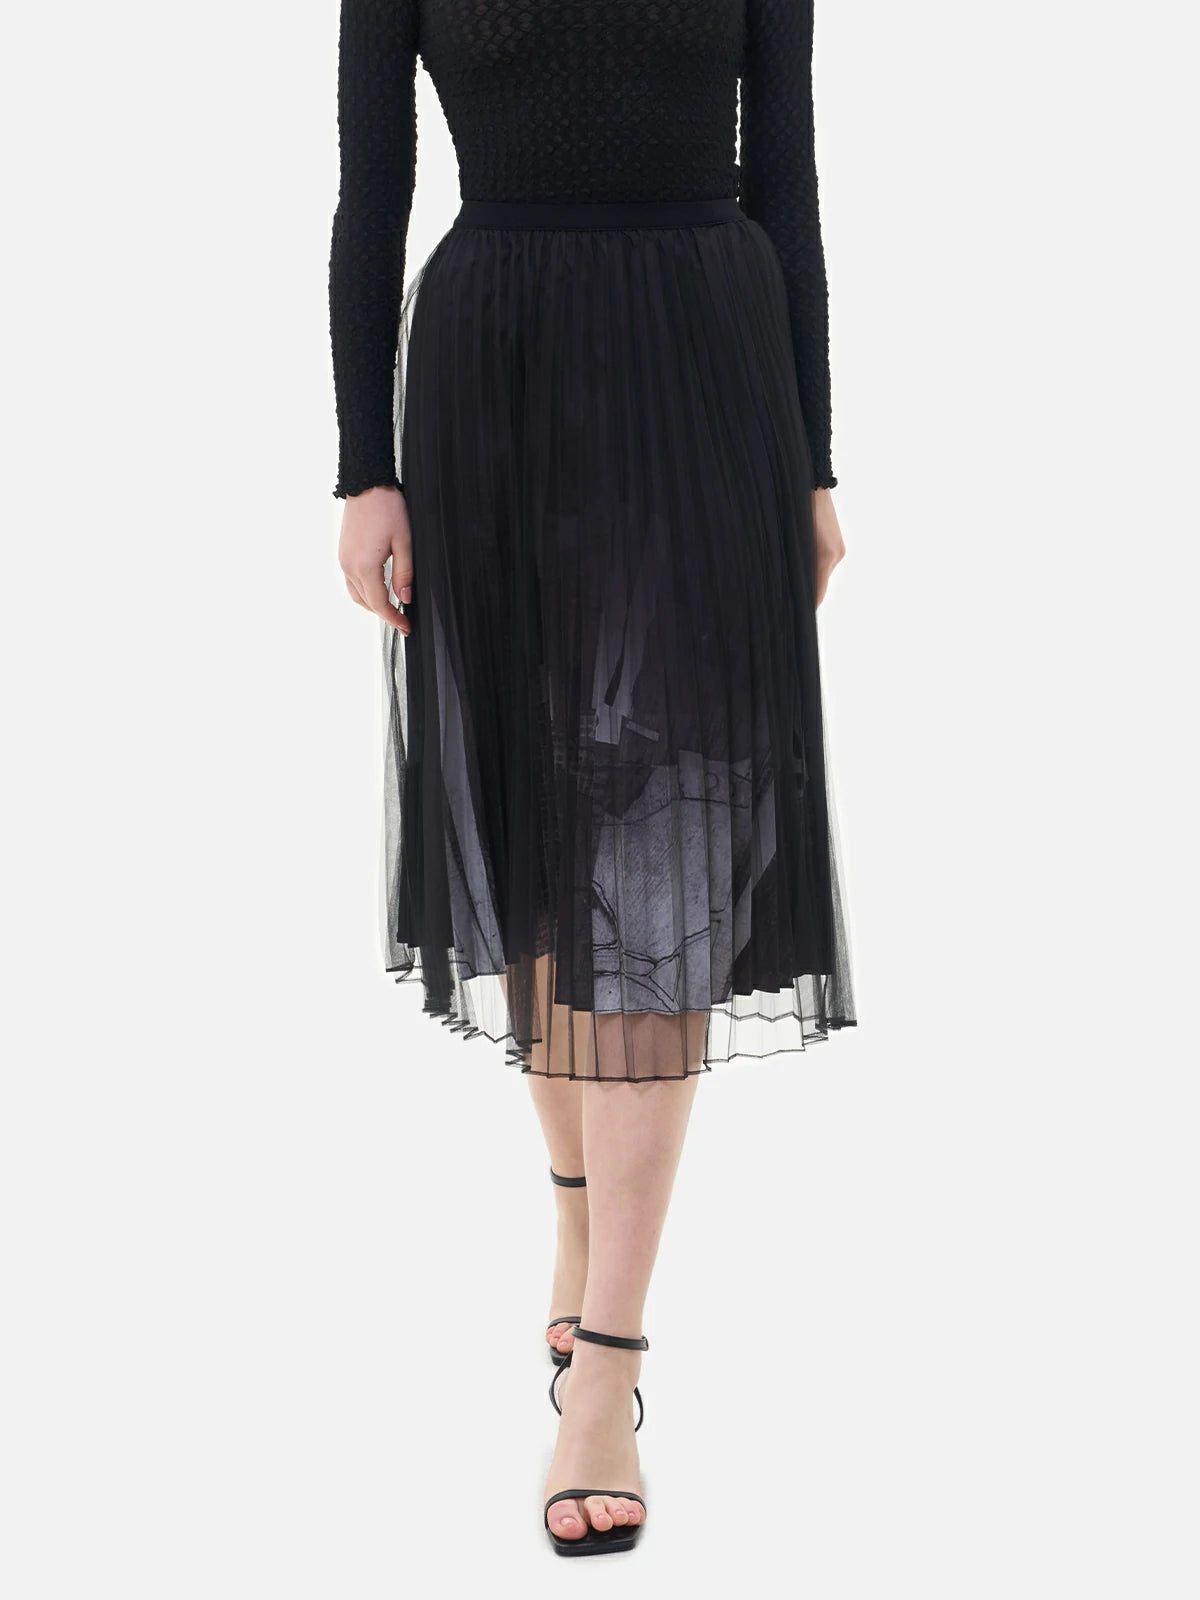 This double-layer skirt features a pleated inner lining, a black-and-white printed pattern, and a structured silhouette.